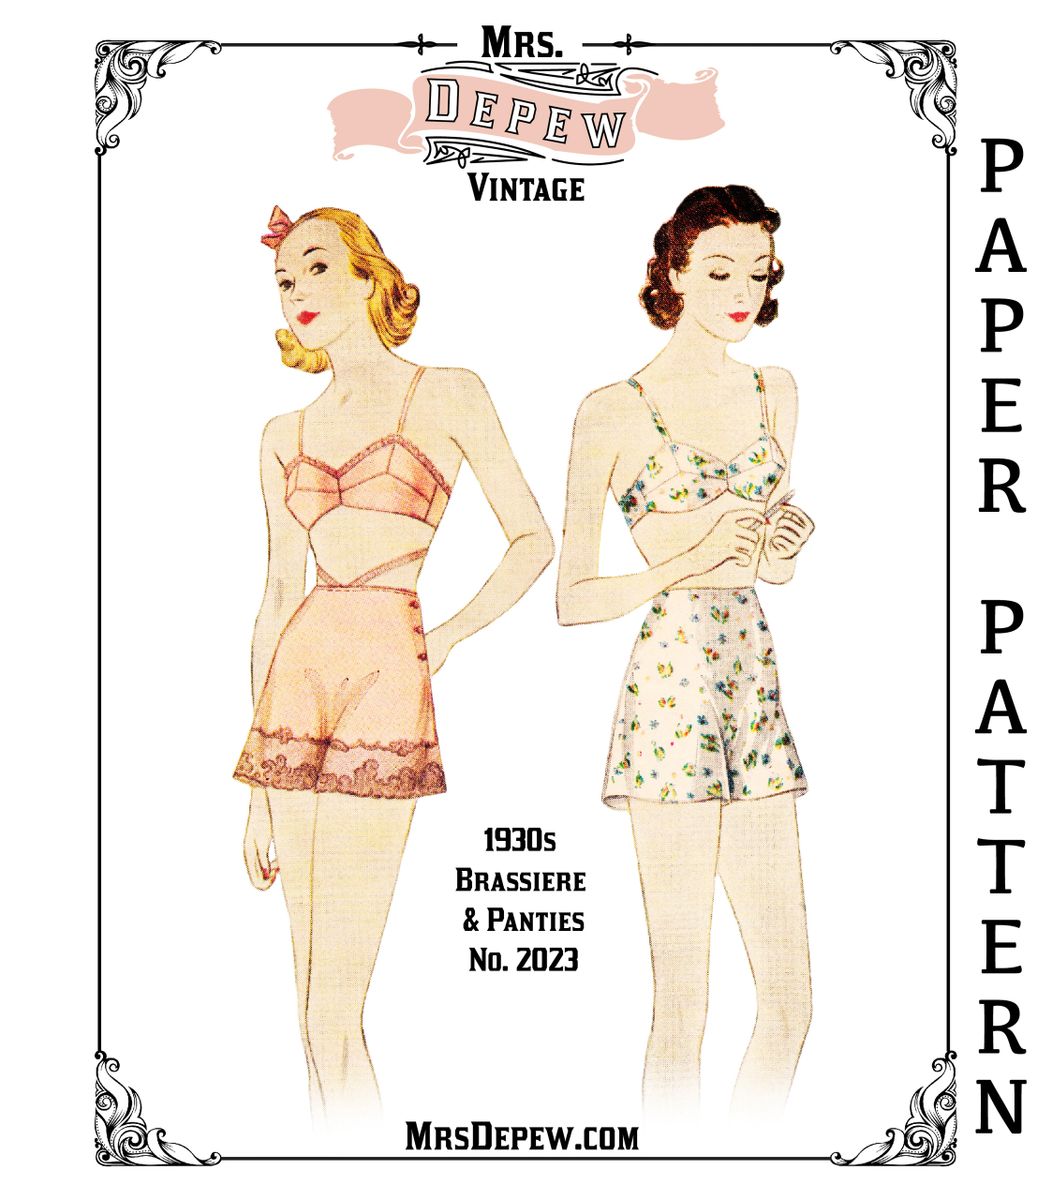 Vintage Sewing Pattern Lingerie Set MultiSize 1930s Bra and Tap Panties  32-50 Inch Bust #2023 - PAPER PATTERN